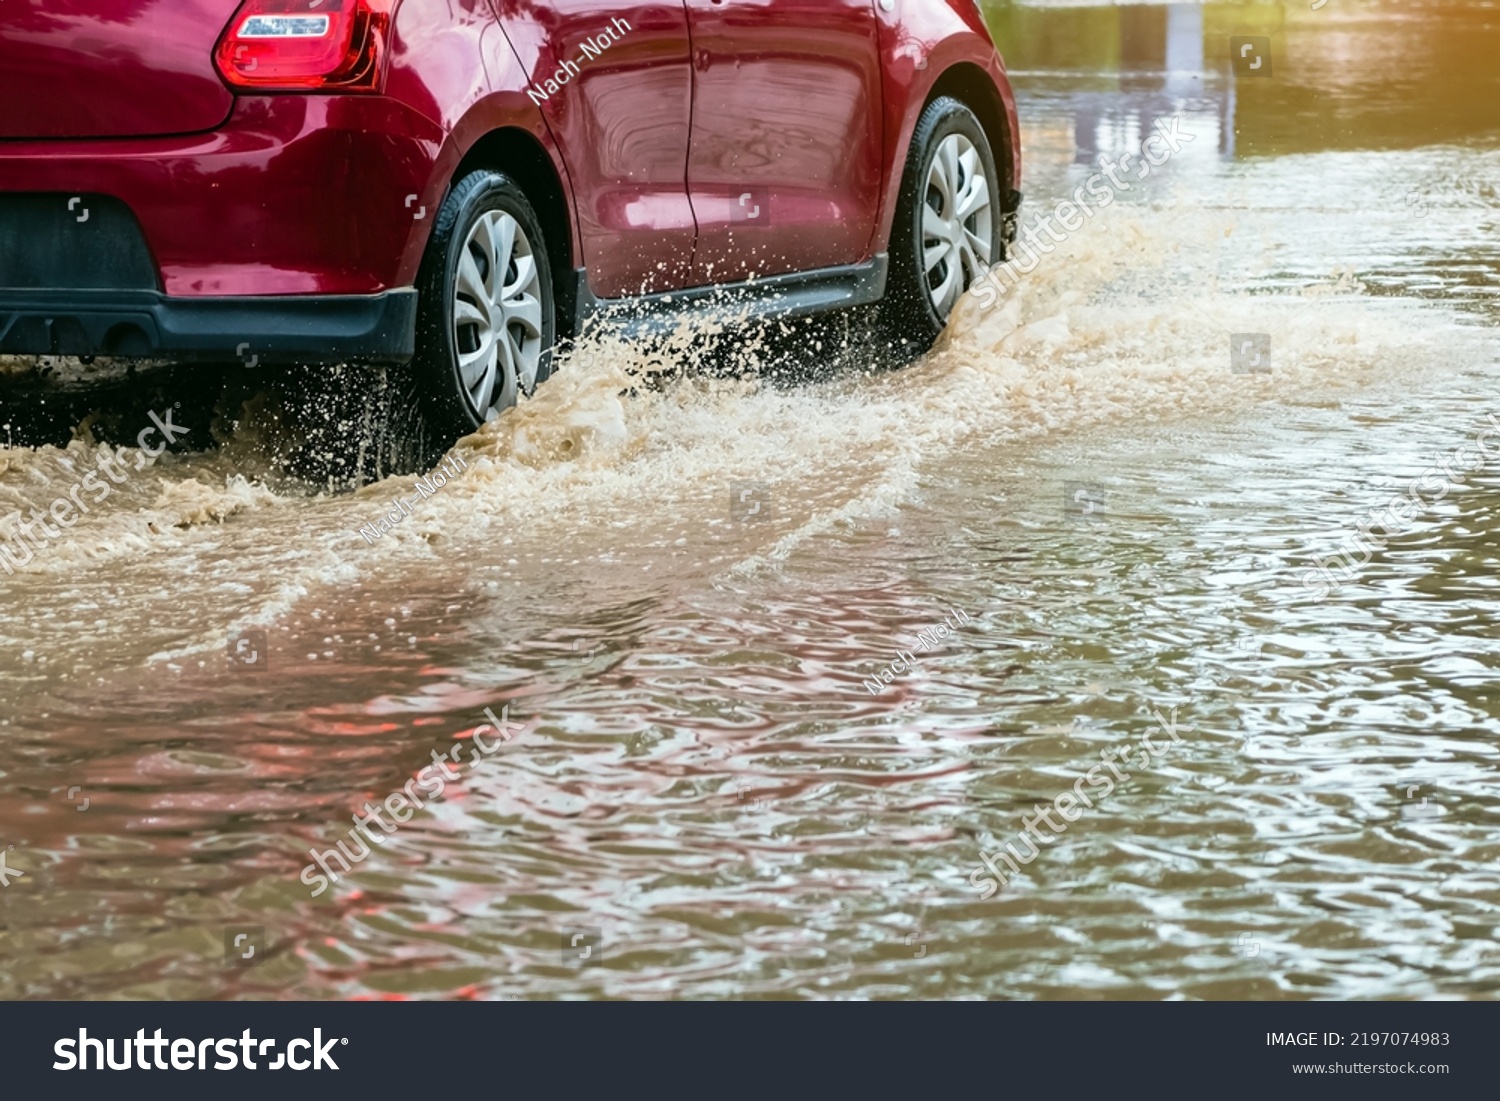 Car passing through a flooded road. Driving car on flooded road during flood caused by torrential rains. Flooded city road with a large puddle. Splash by car through flood water. Selective focus. #2197074983